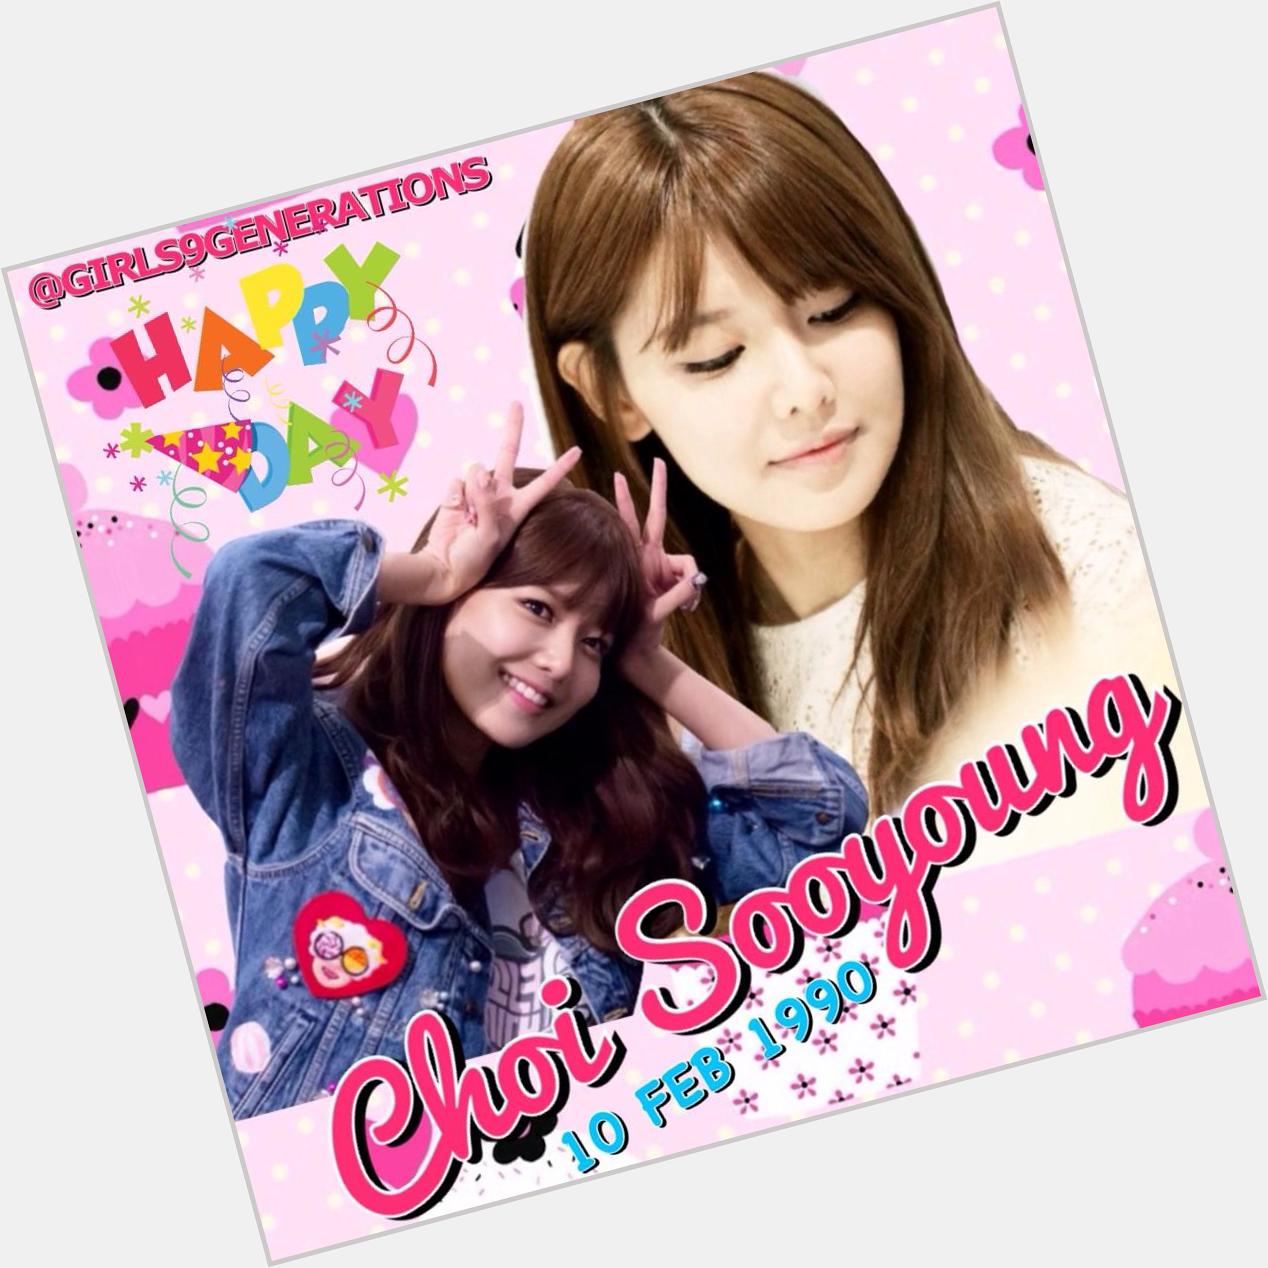 Happy Birthday To Our Beautiful Shikshin Choi Sooyoung  May God Bless You Sooyoungie.I Love U  